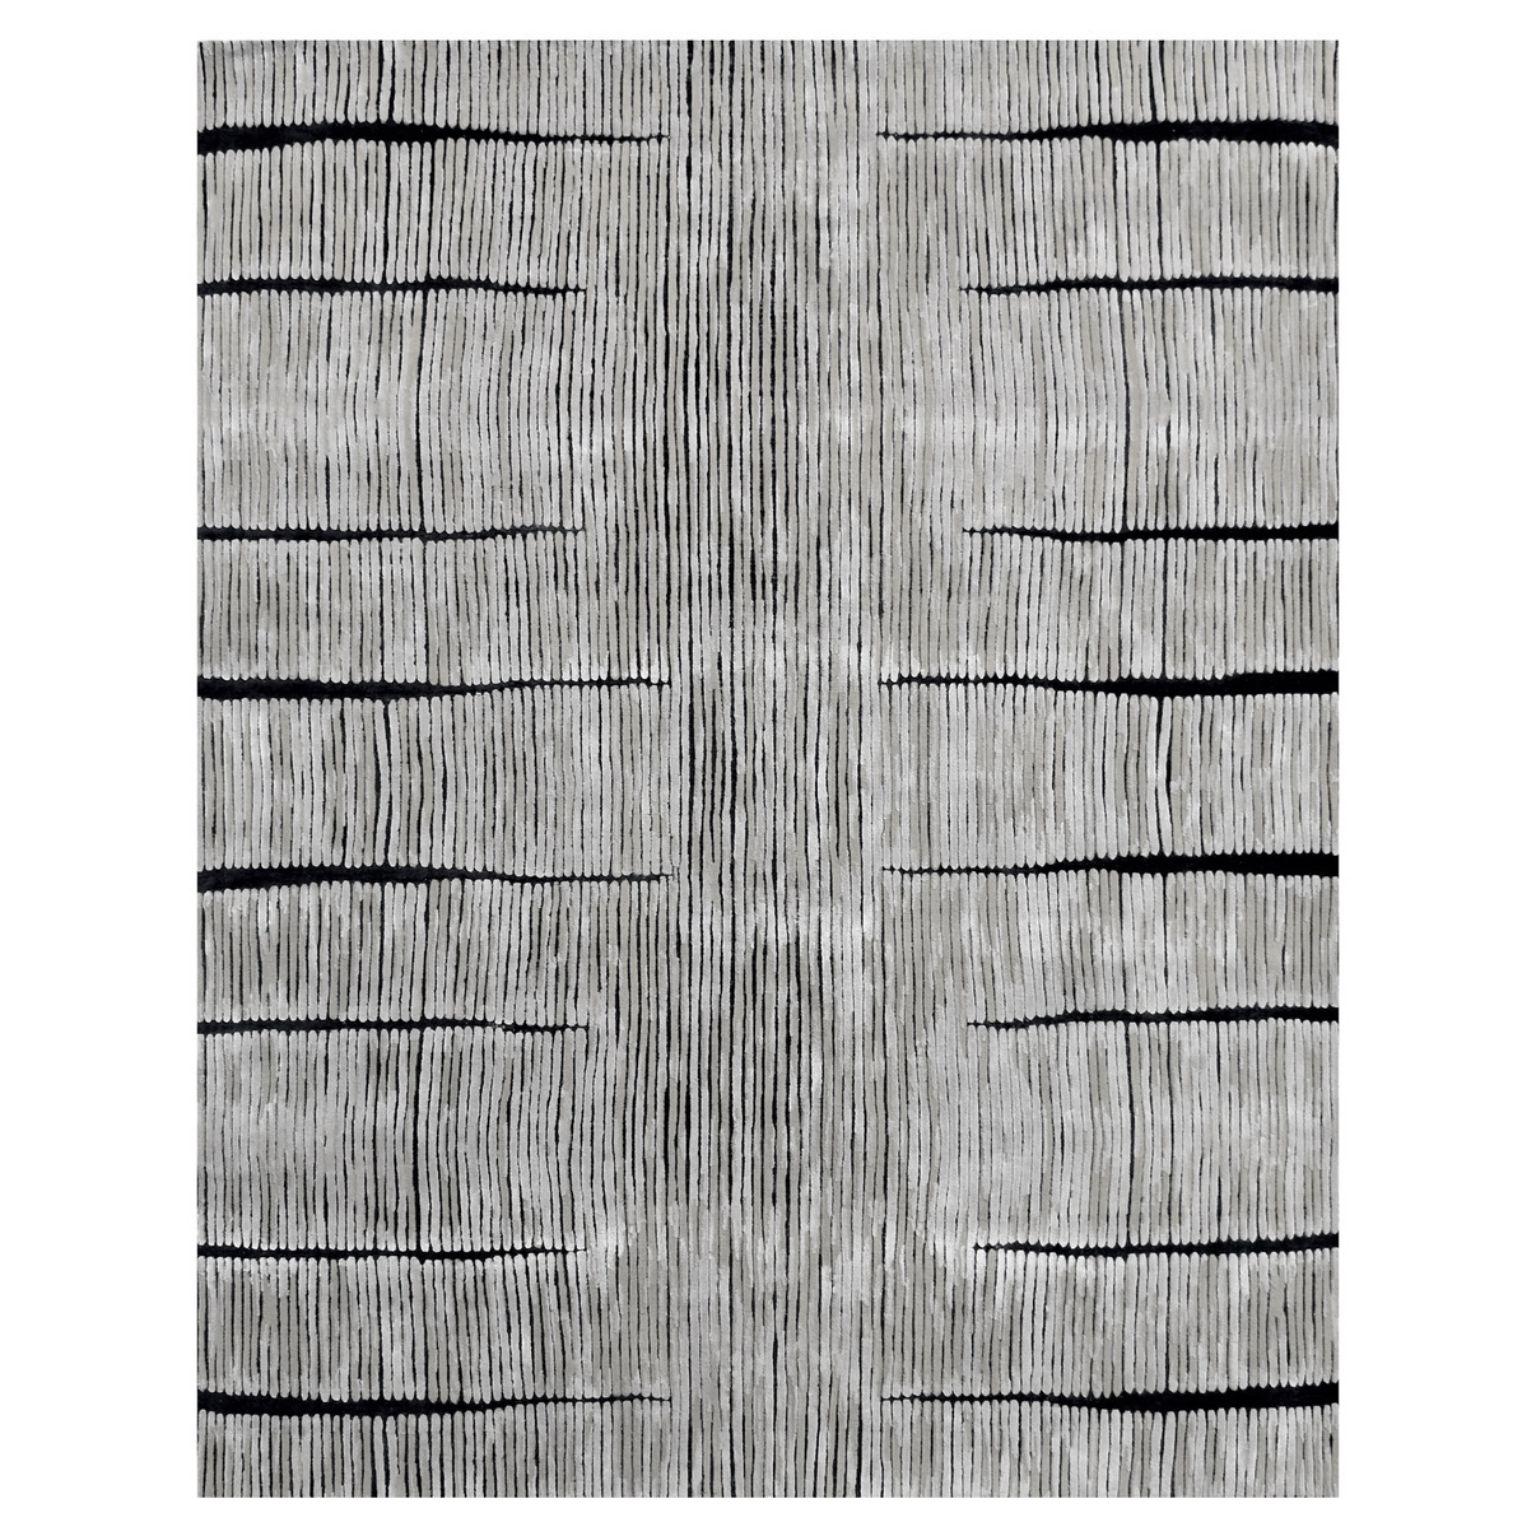 Just a trace large rug by Art & Loom
Dimensions: D 304.8 x H 426.7 cm
Materials: New Zealand wool & Chinese silk
Quality (Knots per Inch): 100
Also available in different dimensions.

Samantha Gallacher has always had a keen eye for